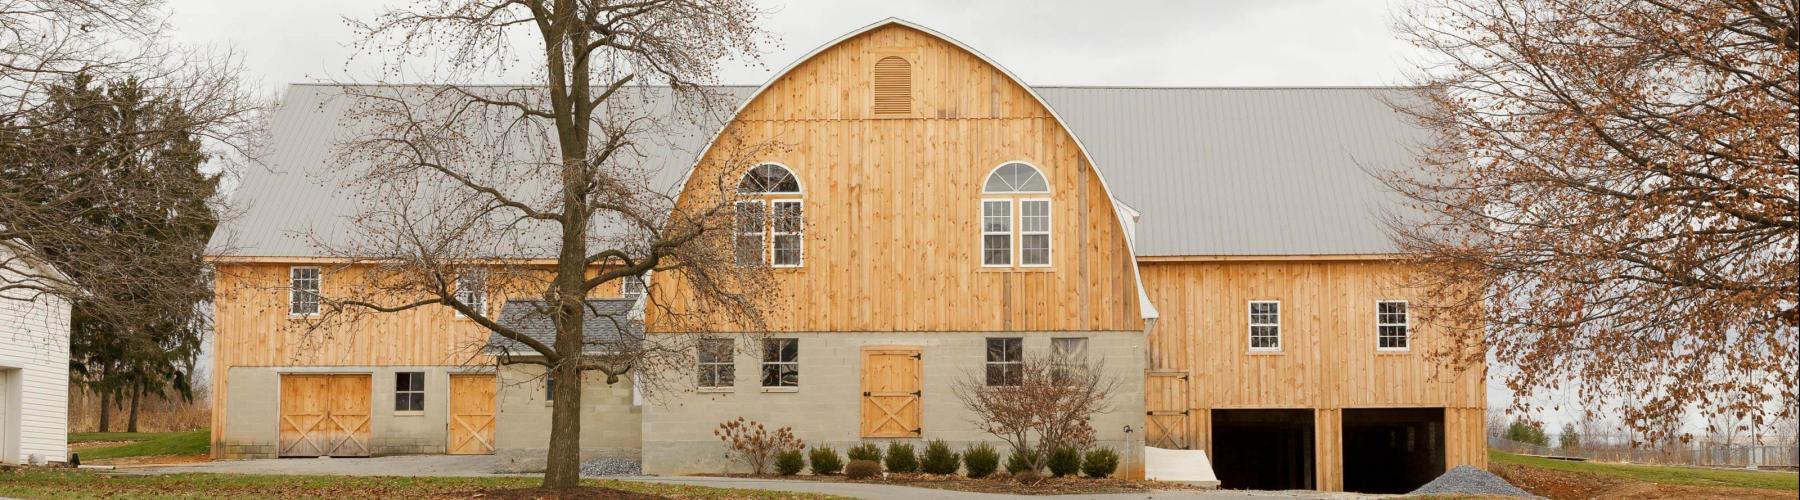 Another barn restoration by Stable Hollow Construction